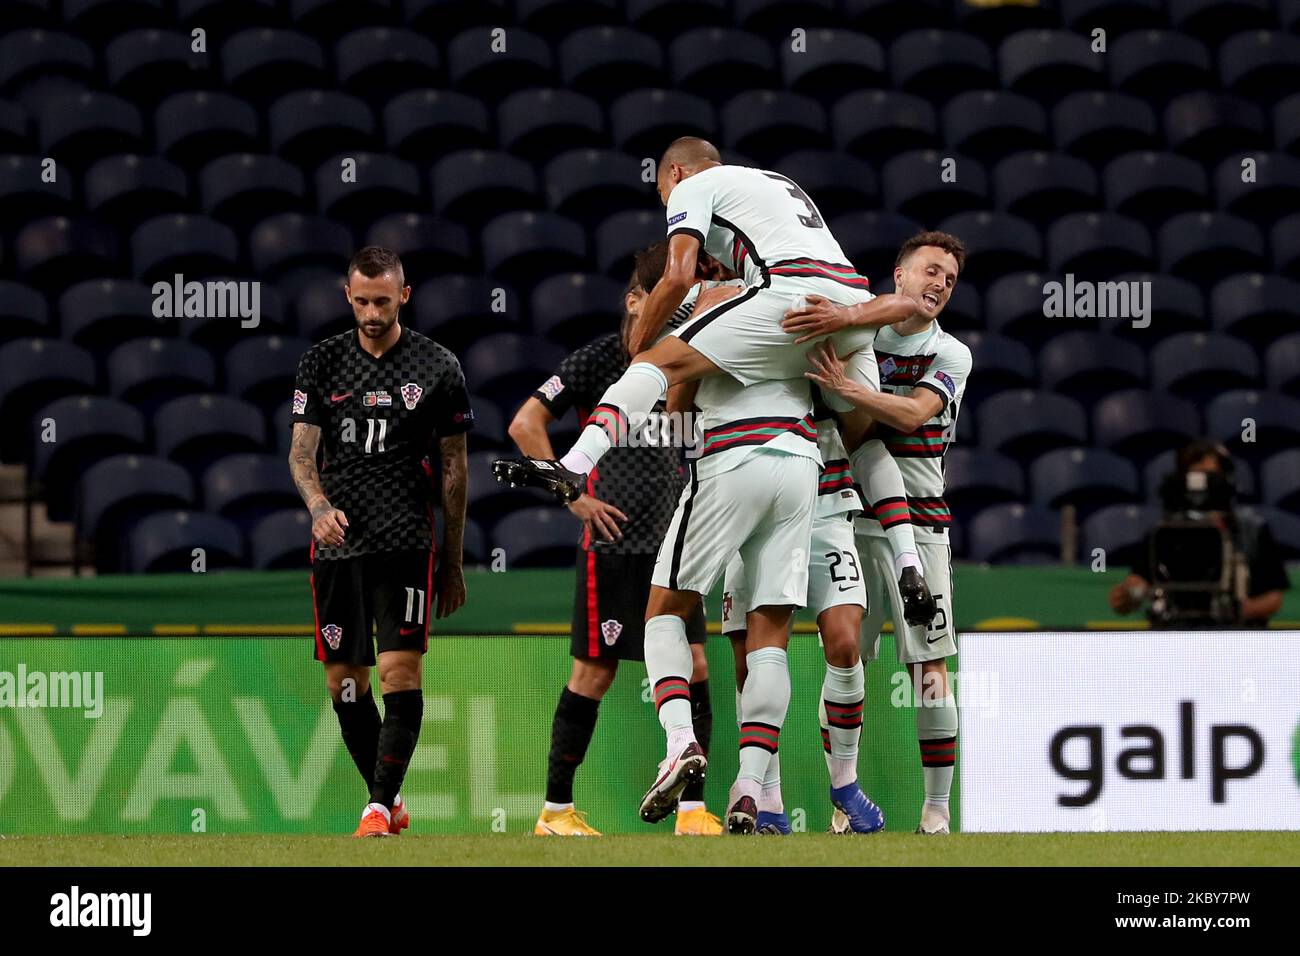 Joao Felix of Portugal celebrates with teammates after scoring during the UEFA Nations League group stage football match between Portugal and Croatia at the Dragao stadium in Porto, Portugal on September 5, 2020. (Photo by Pedro FiÃºza/NurPhoto) Stock Photo